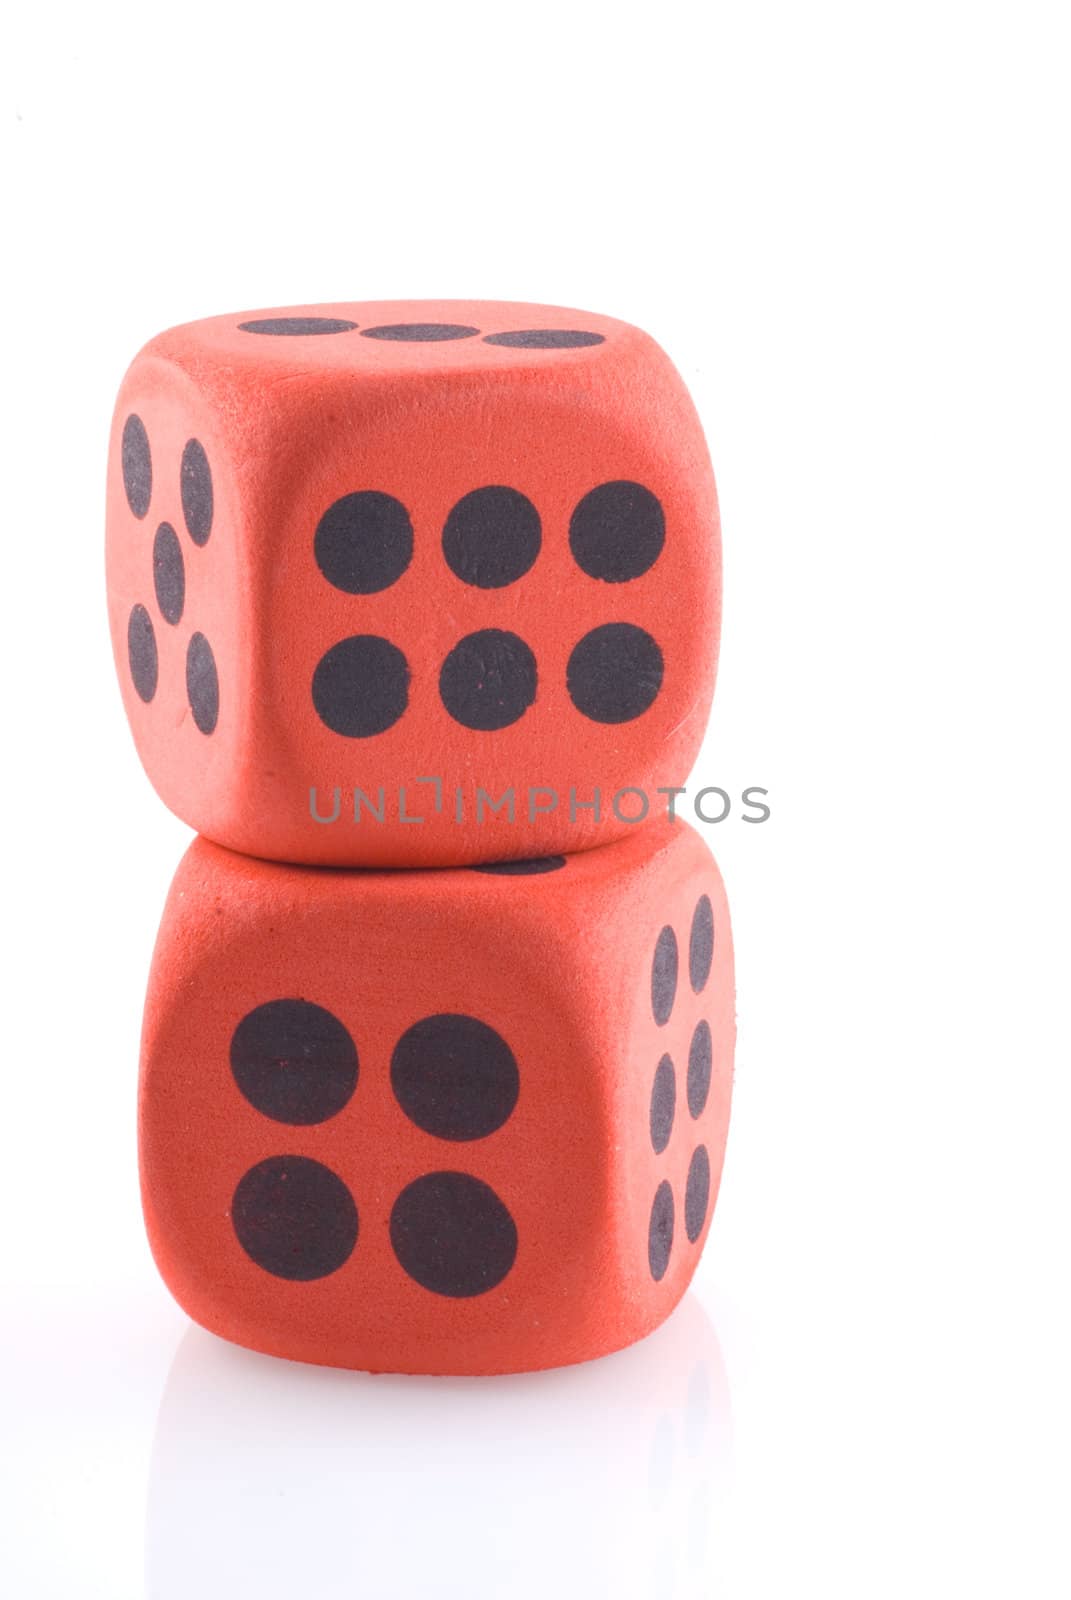 Red dice. by SasPartout